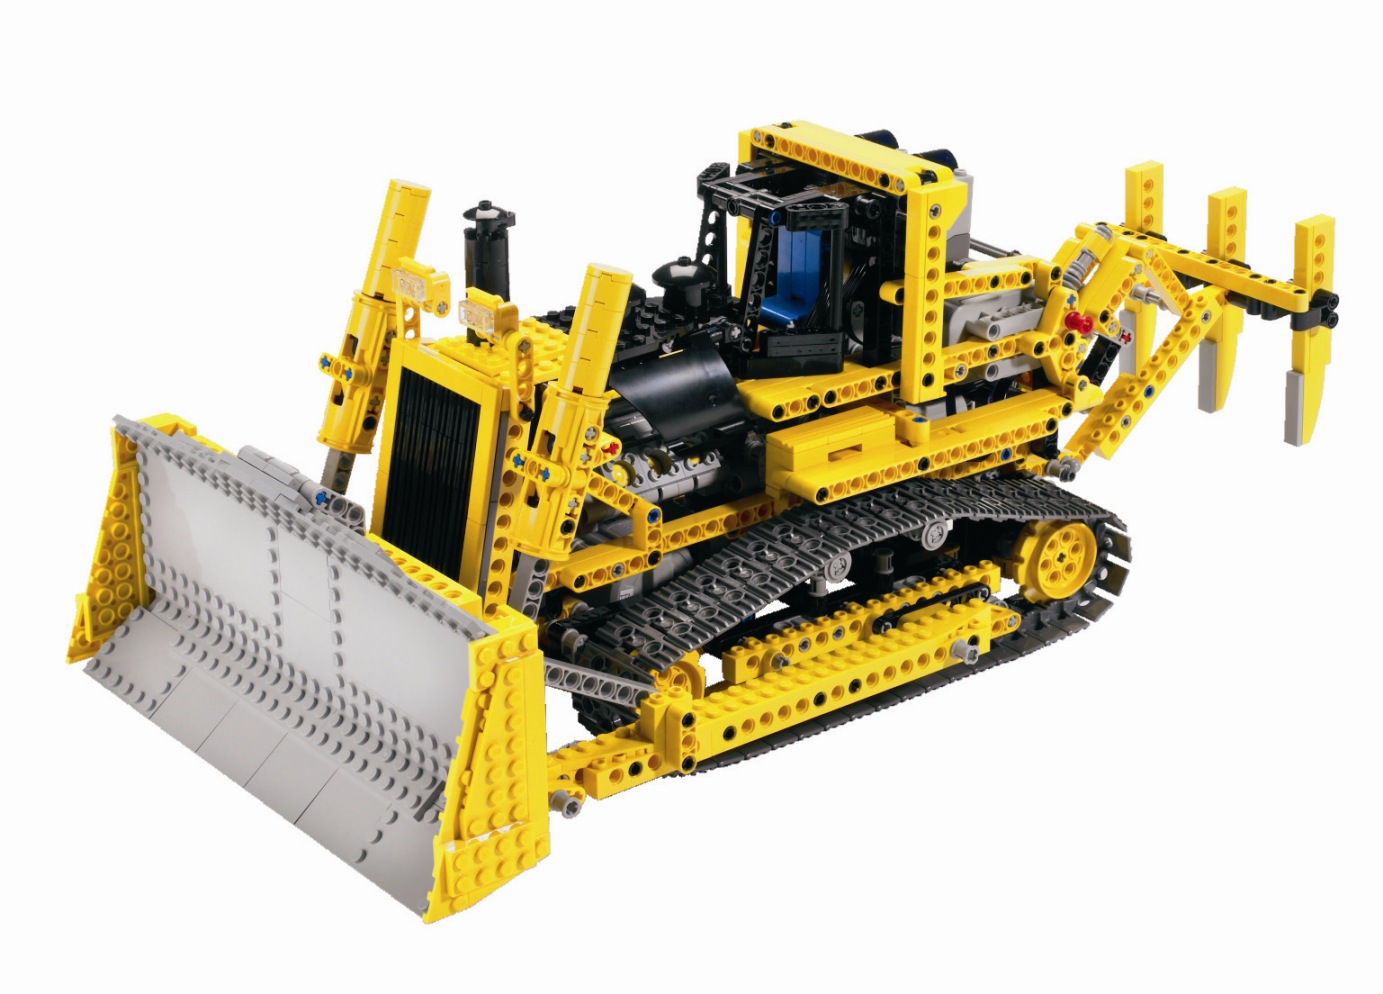 lego technic has launched this cool motorised bulldozer, a realistic